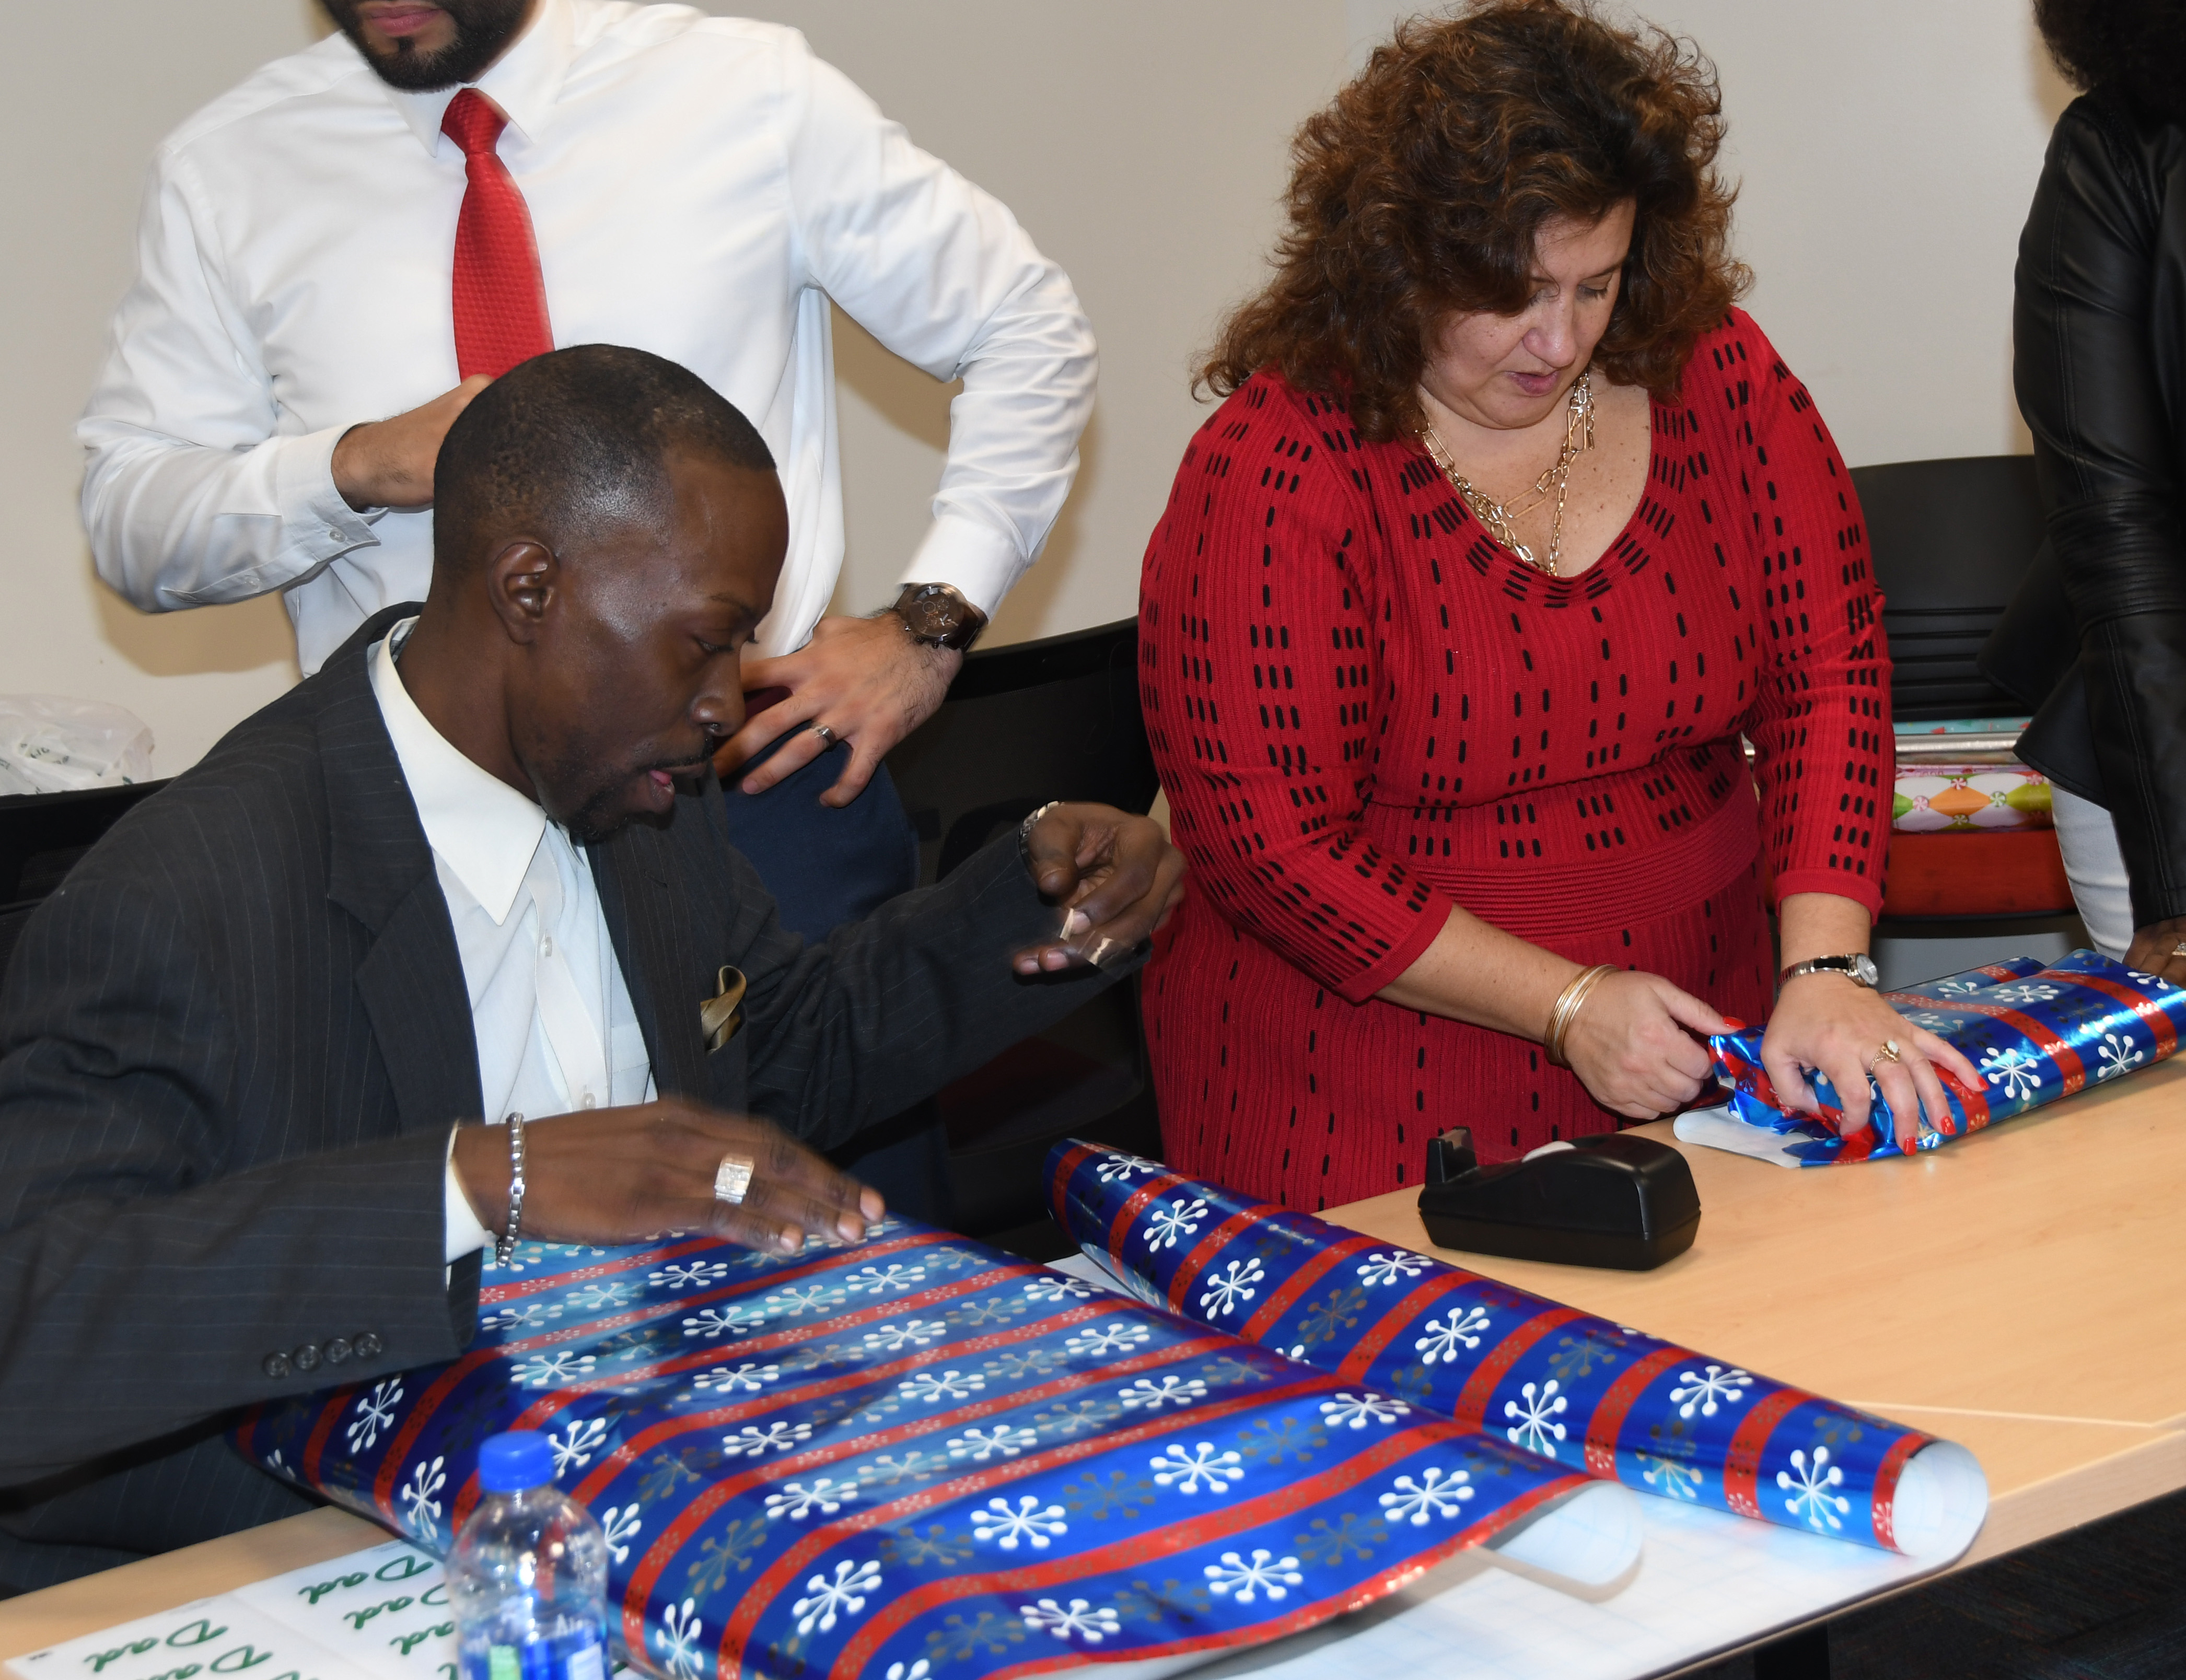 Office of Student Success members wrap gifts for two local families.